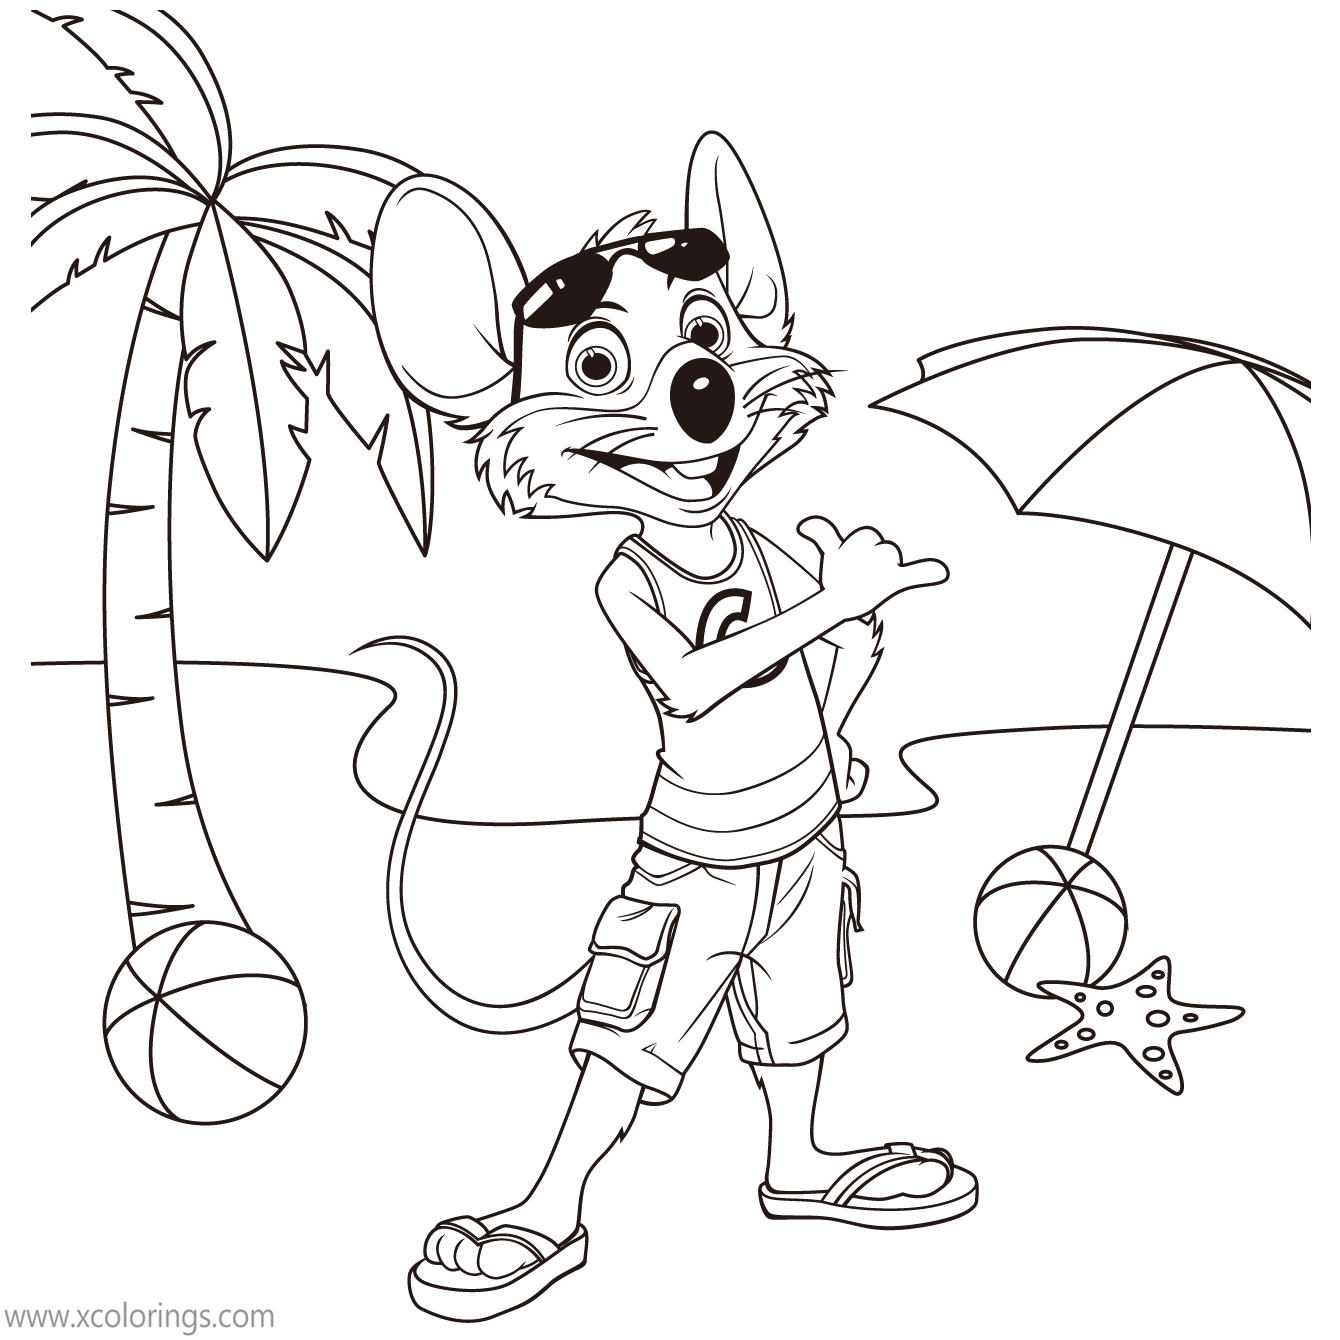 Free Chuck E Cheese Coloring Pages Summer printable